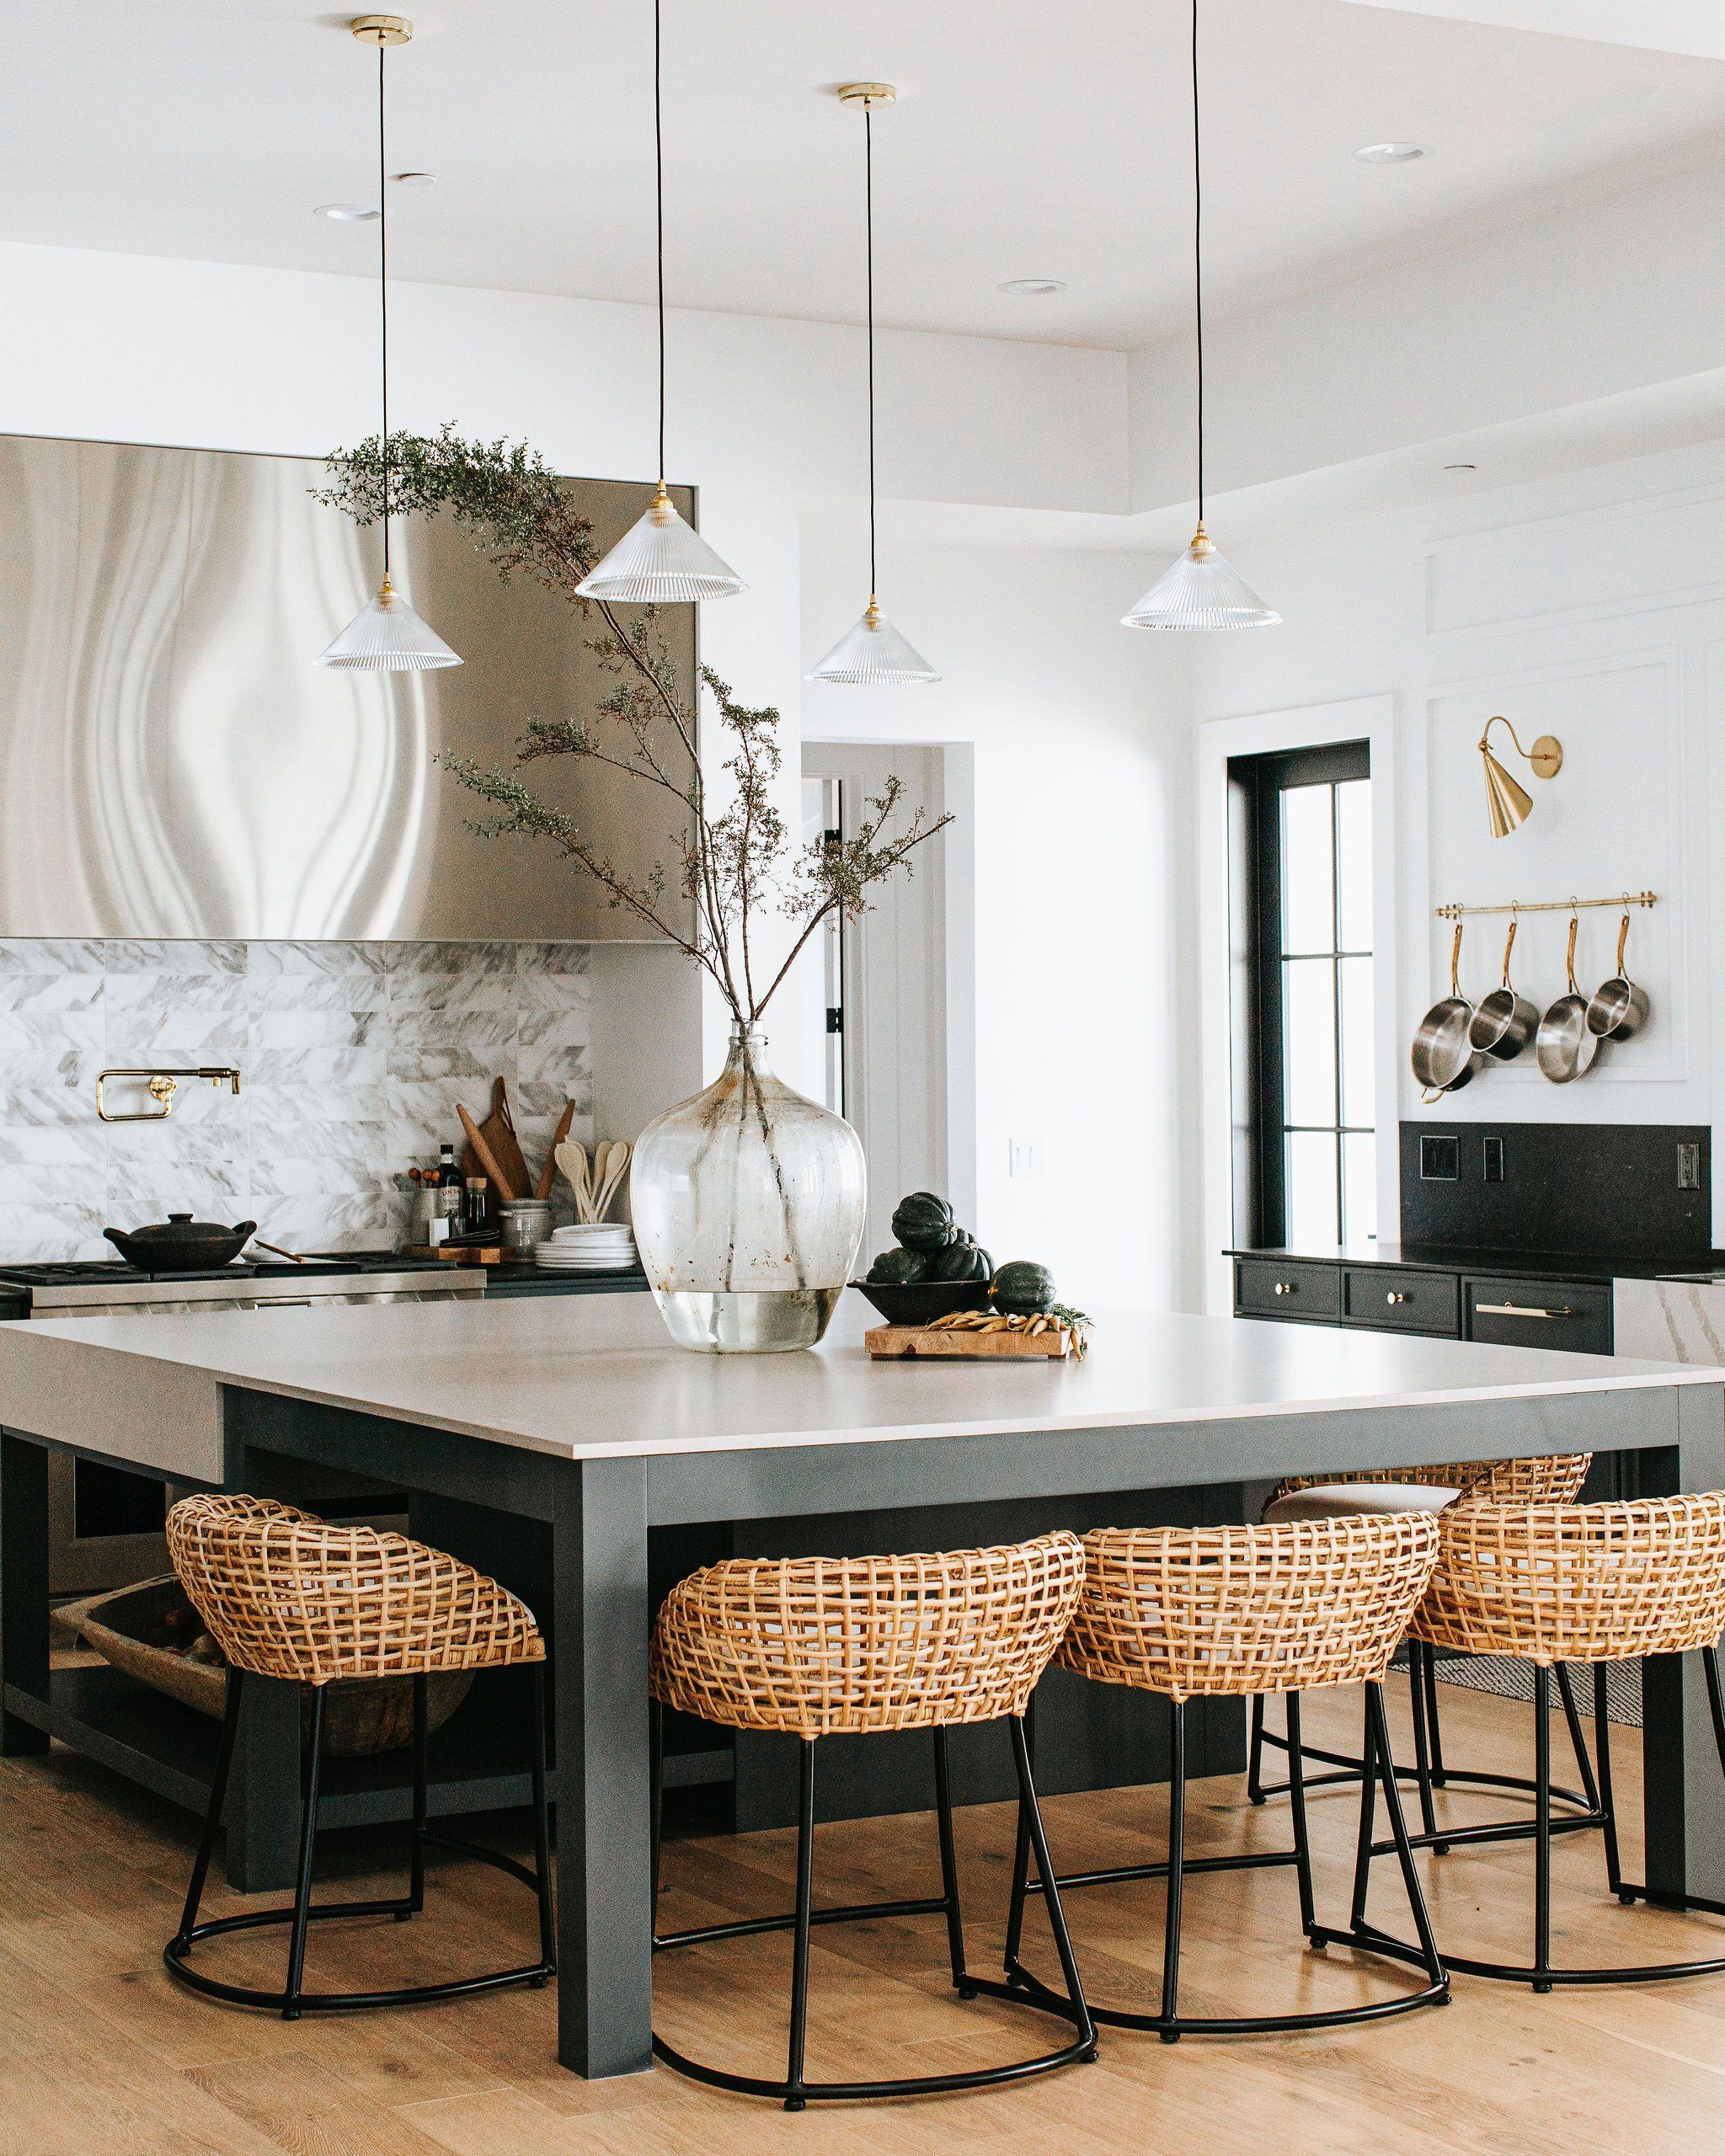 Maximizing Space with a Large Kitchen
Island: Ideas and Inspiration